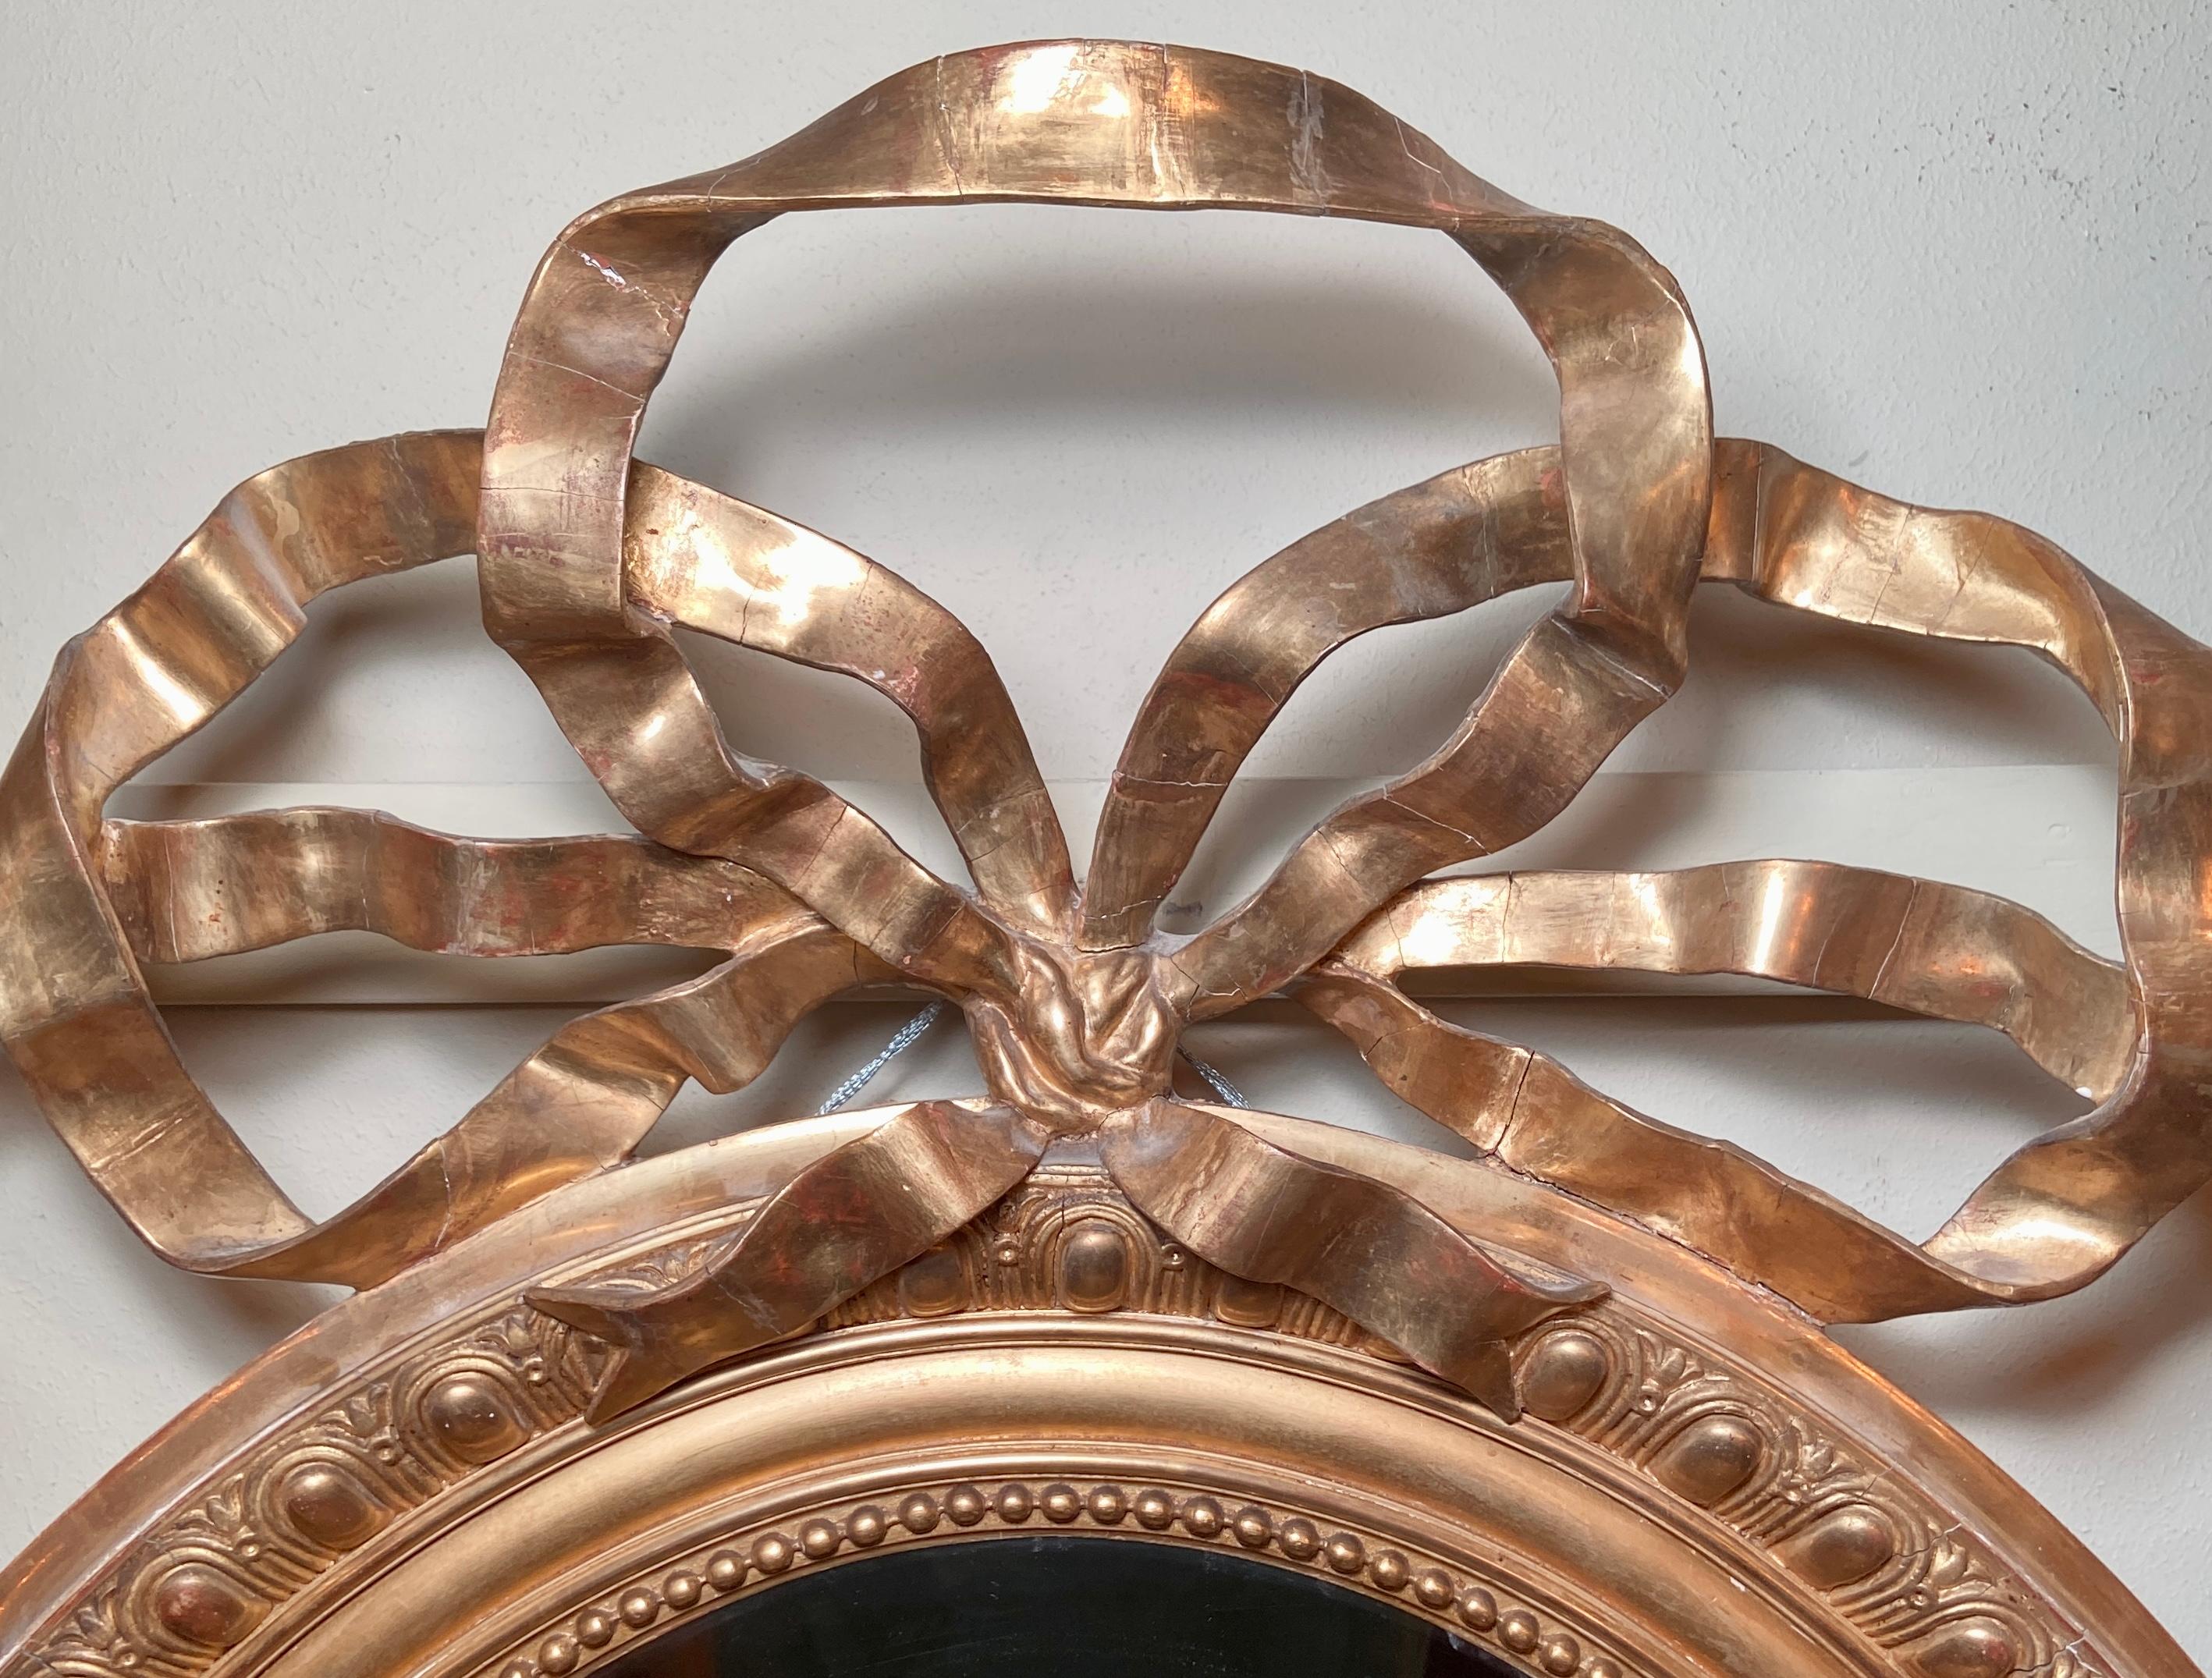 Antique early 19th century French extraordinary gold leaf mirror, oval-shaped with ribbon & bow detail.